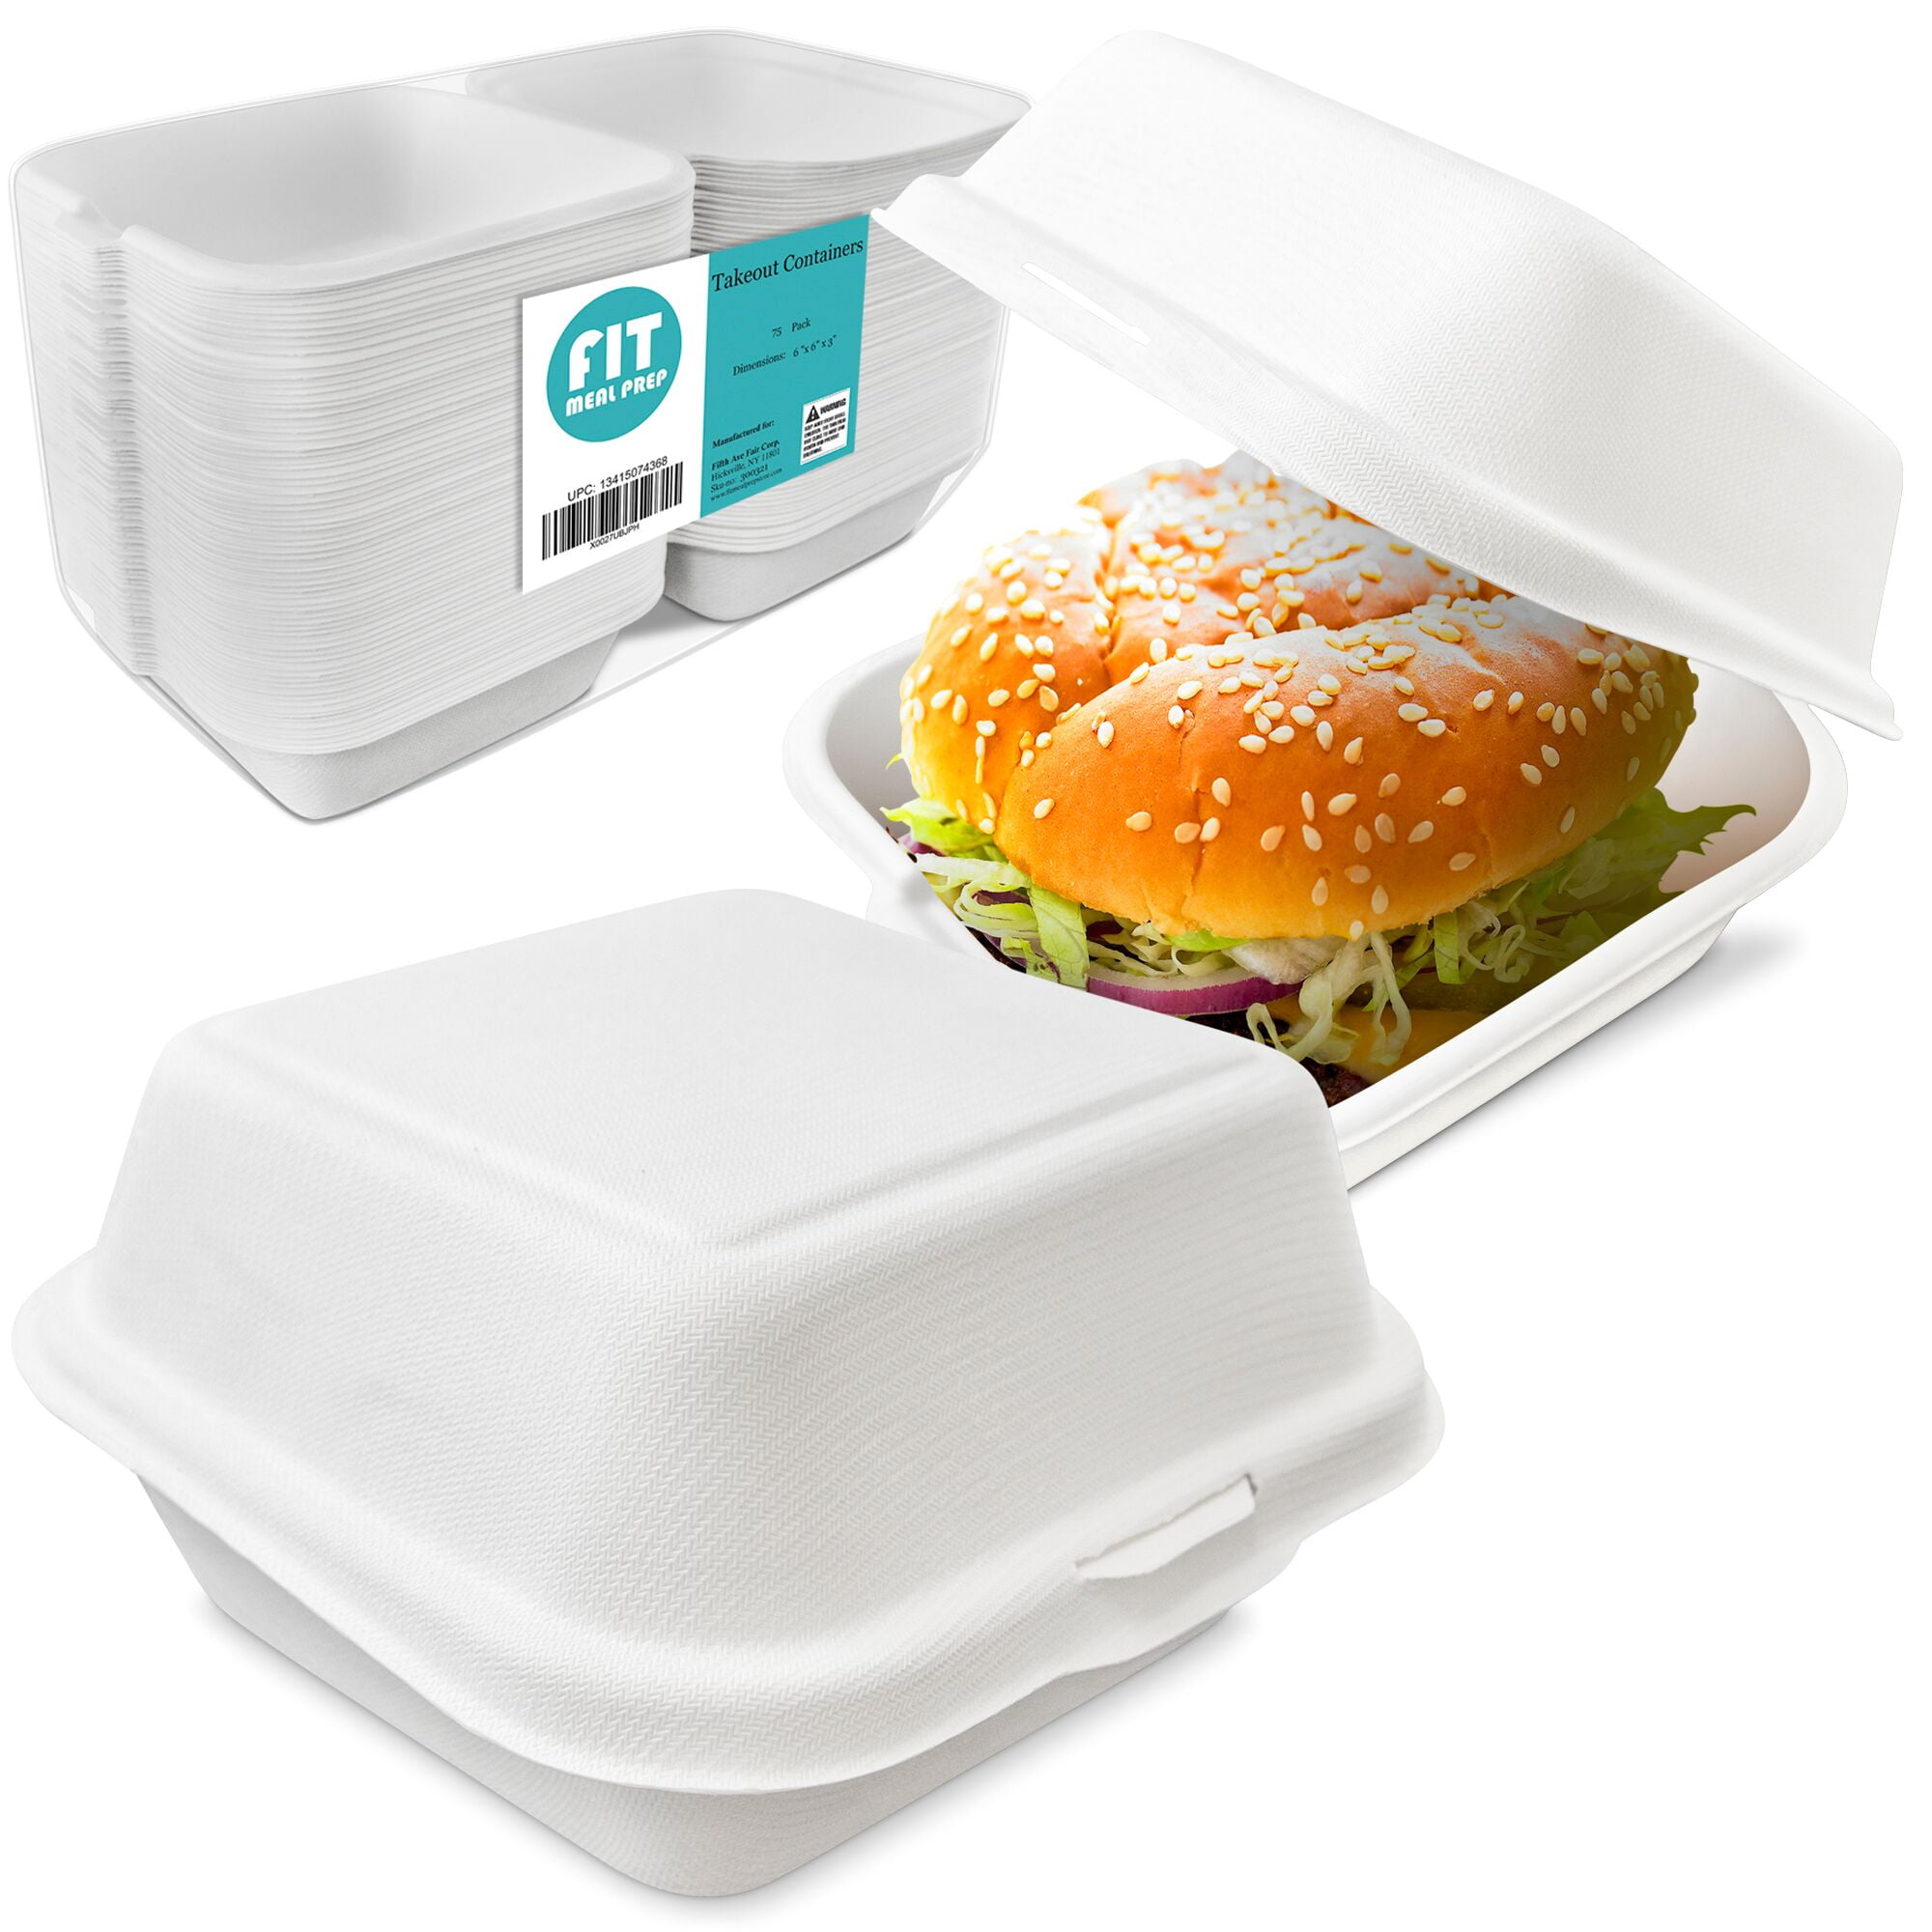 50 Pack] 9x6x3” Clamshell Food Containers with 1 Compartment 